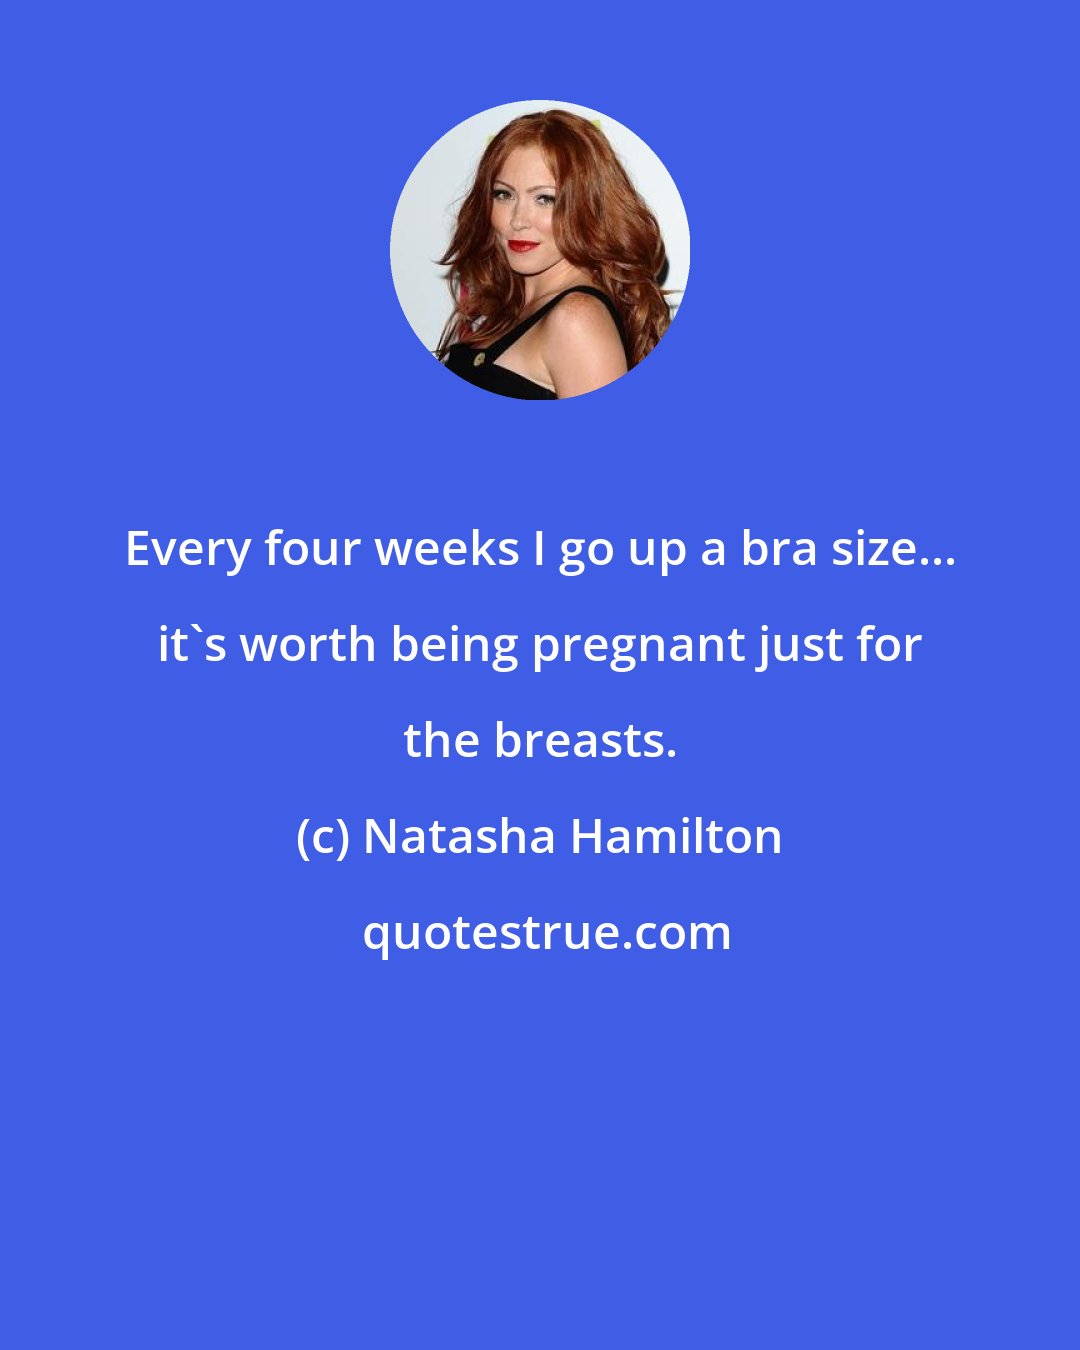 Natasha Hamilton: Every four weeks I go up a bra size... it's worth being pregnant just for the breasts.